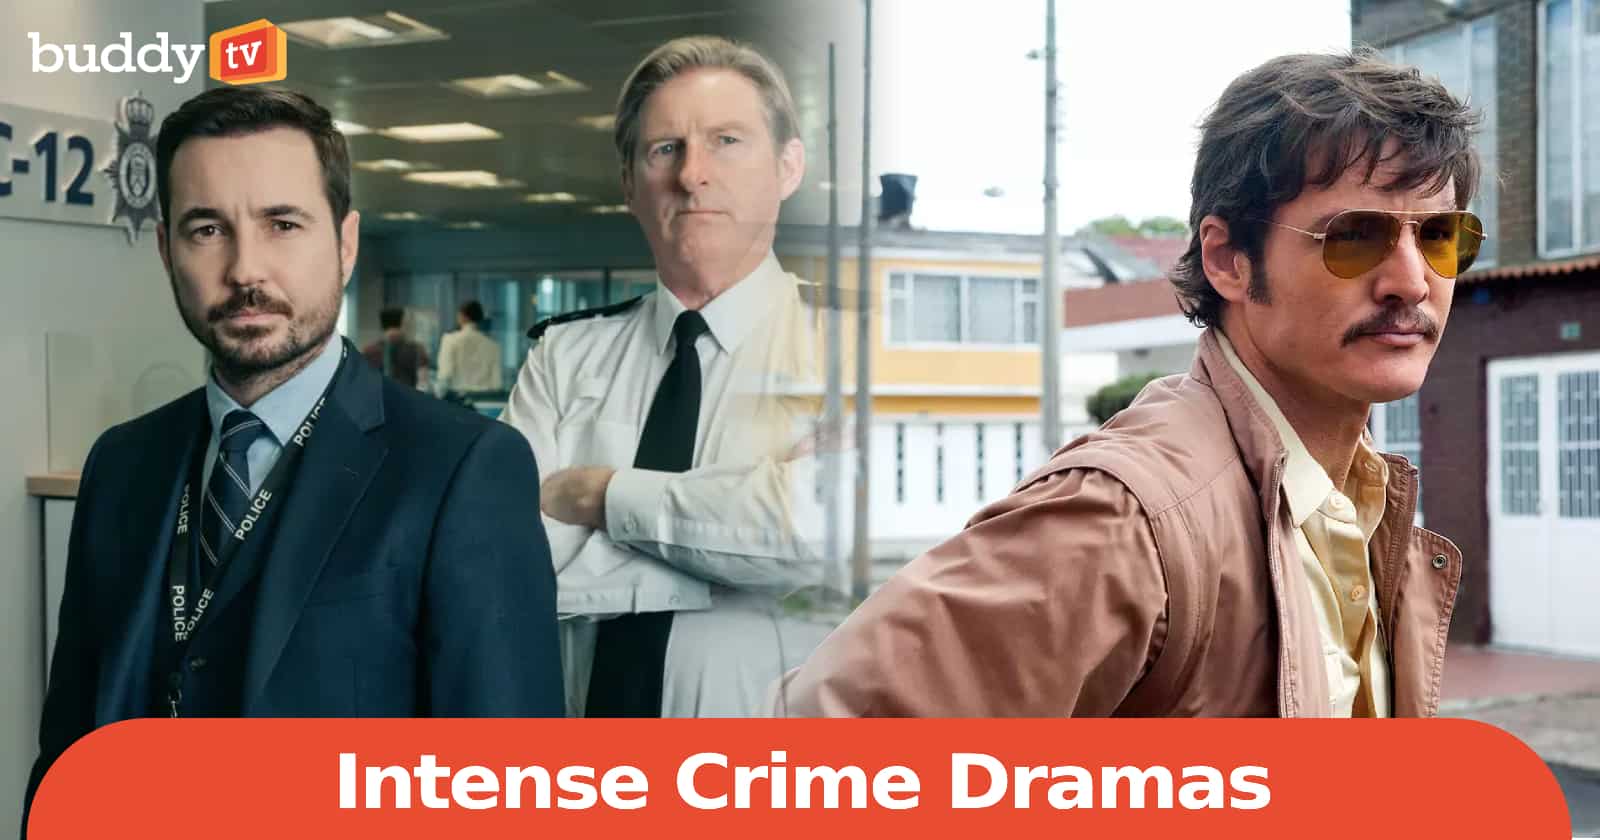 9 Intense Crime Dramas (That Will Keep You Guessing)